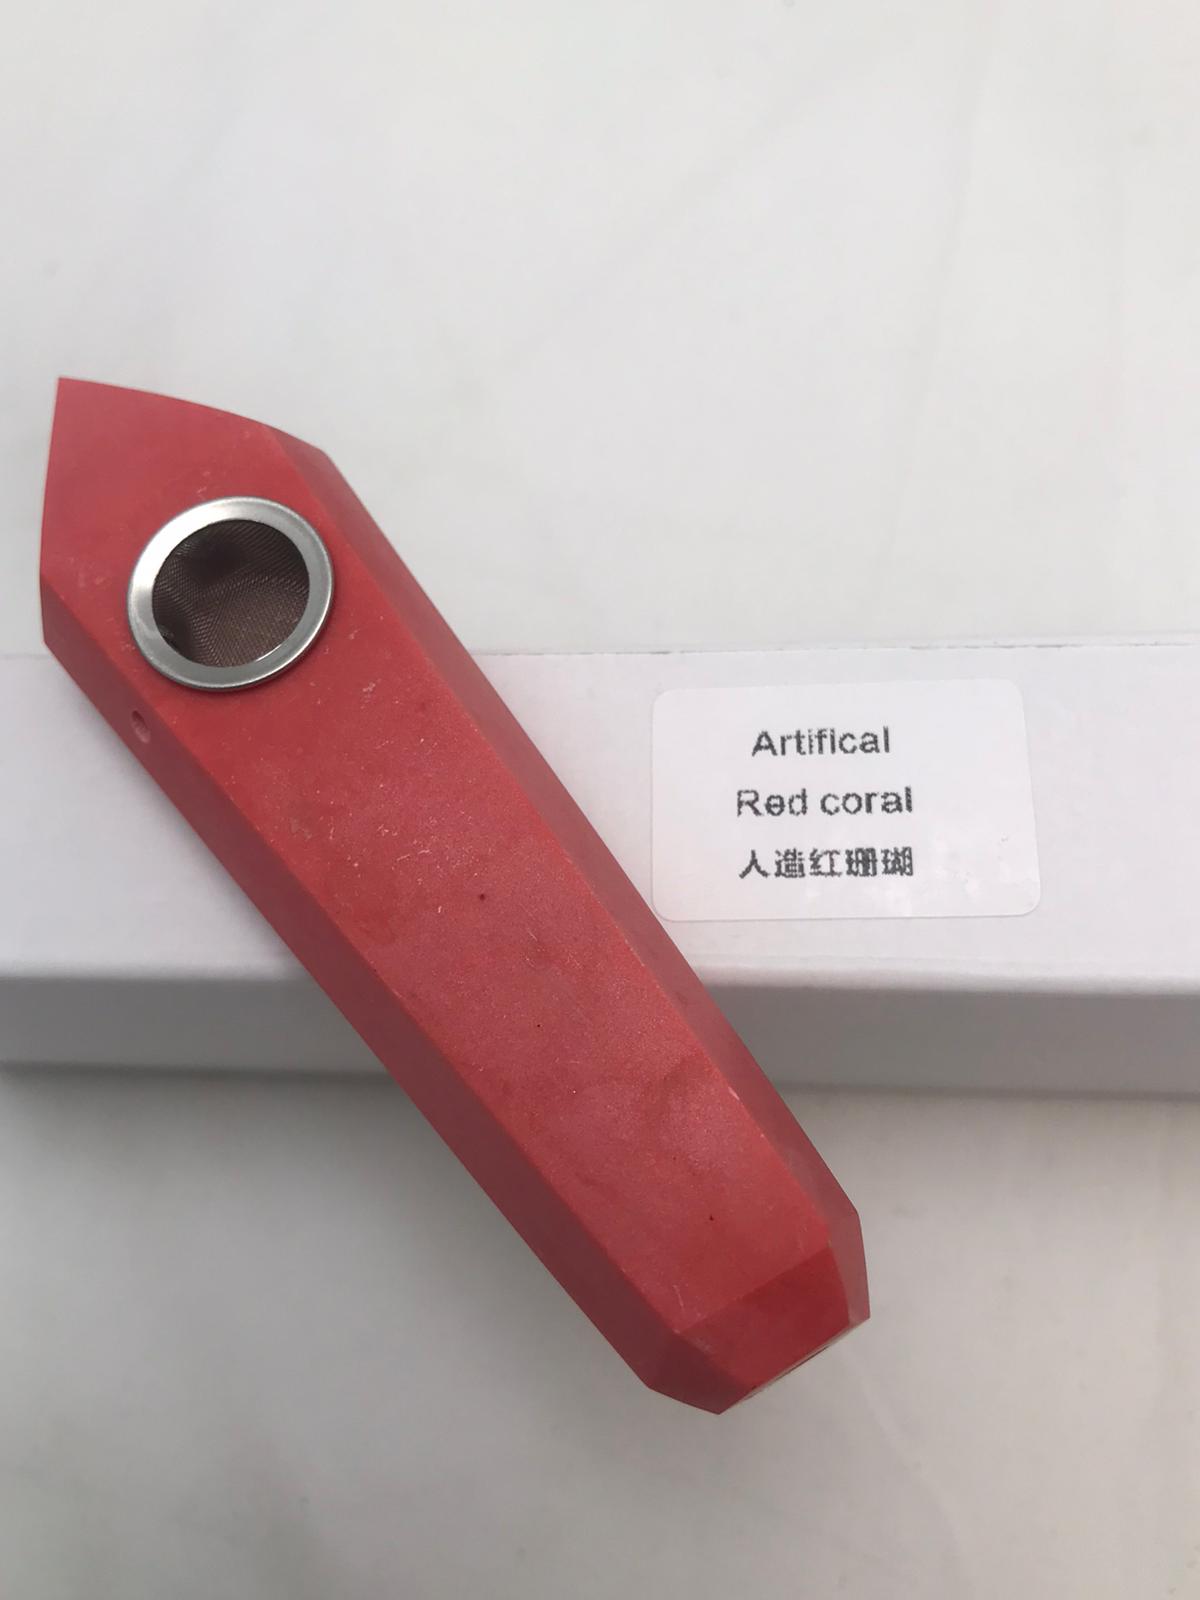 Real Natural healing stone pipe ARTIFICIAL RED CORAL